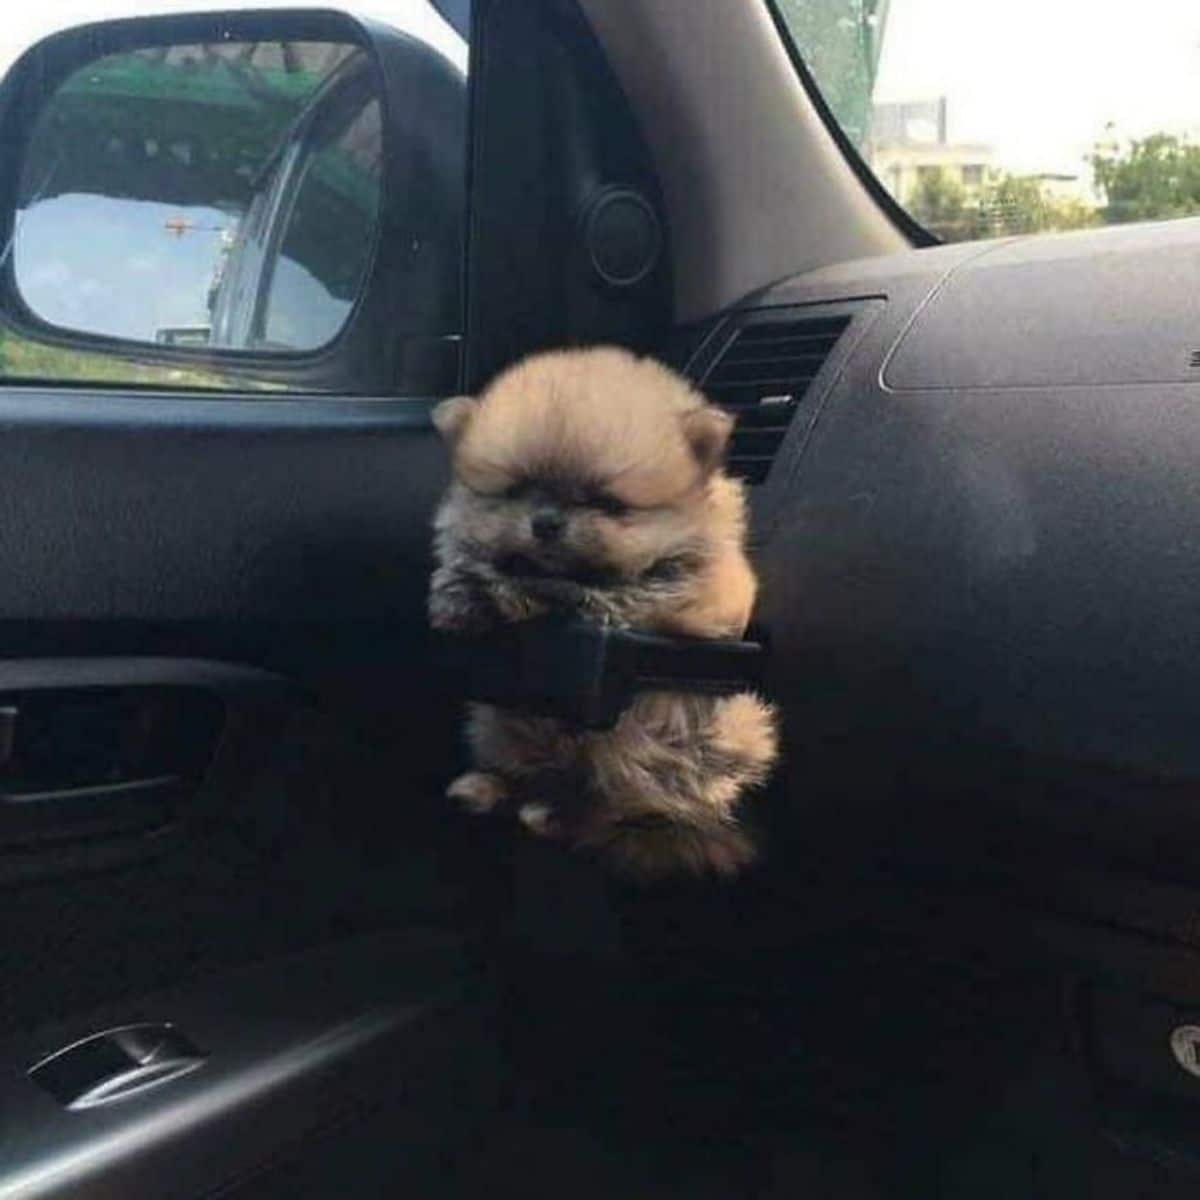 brown and black fluffy puppy kept in a cup holder in a vehicle